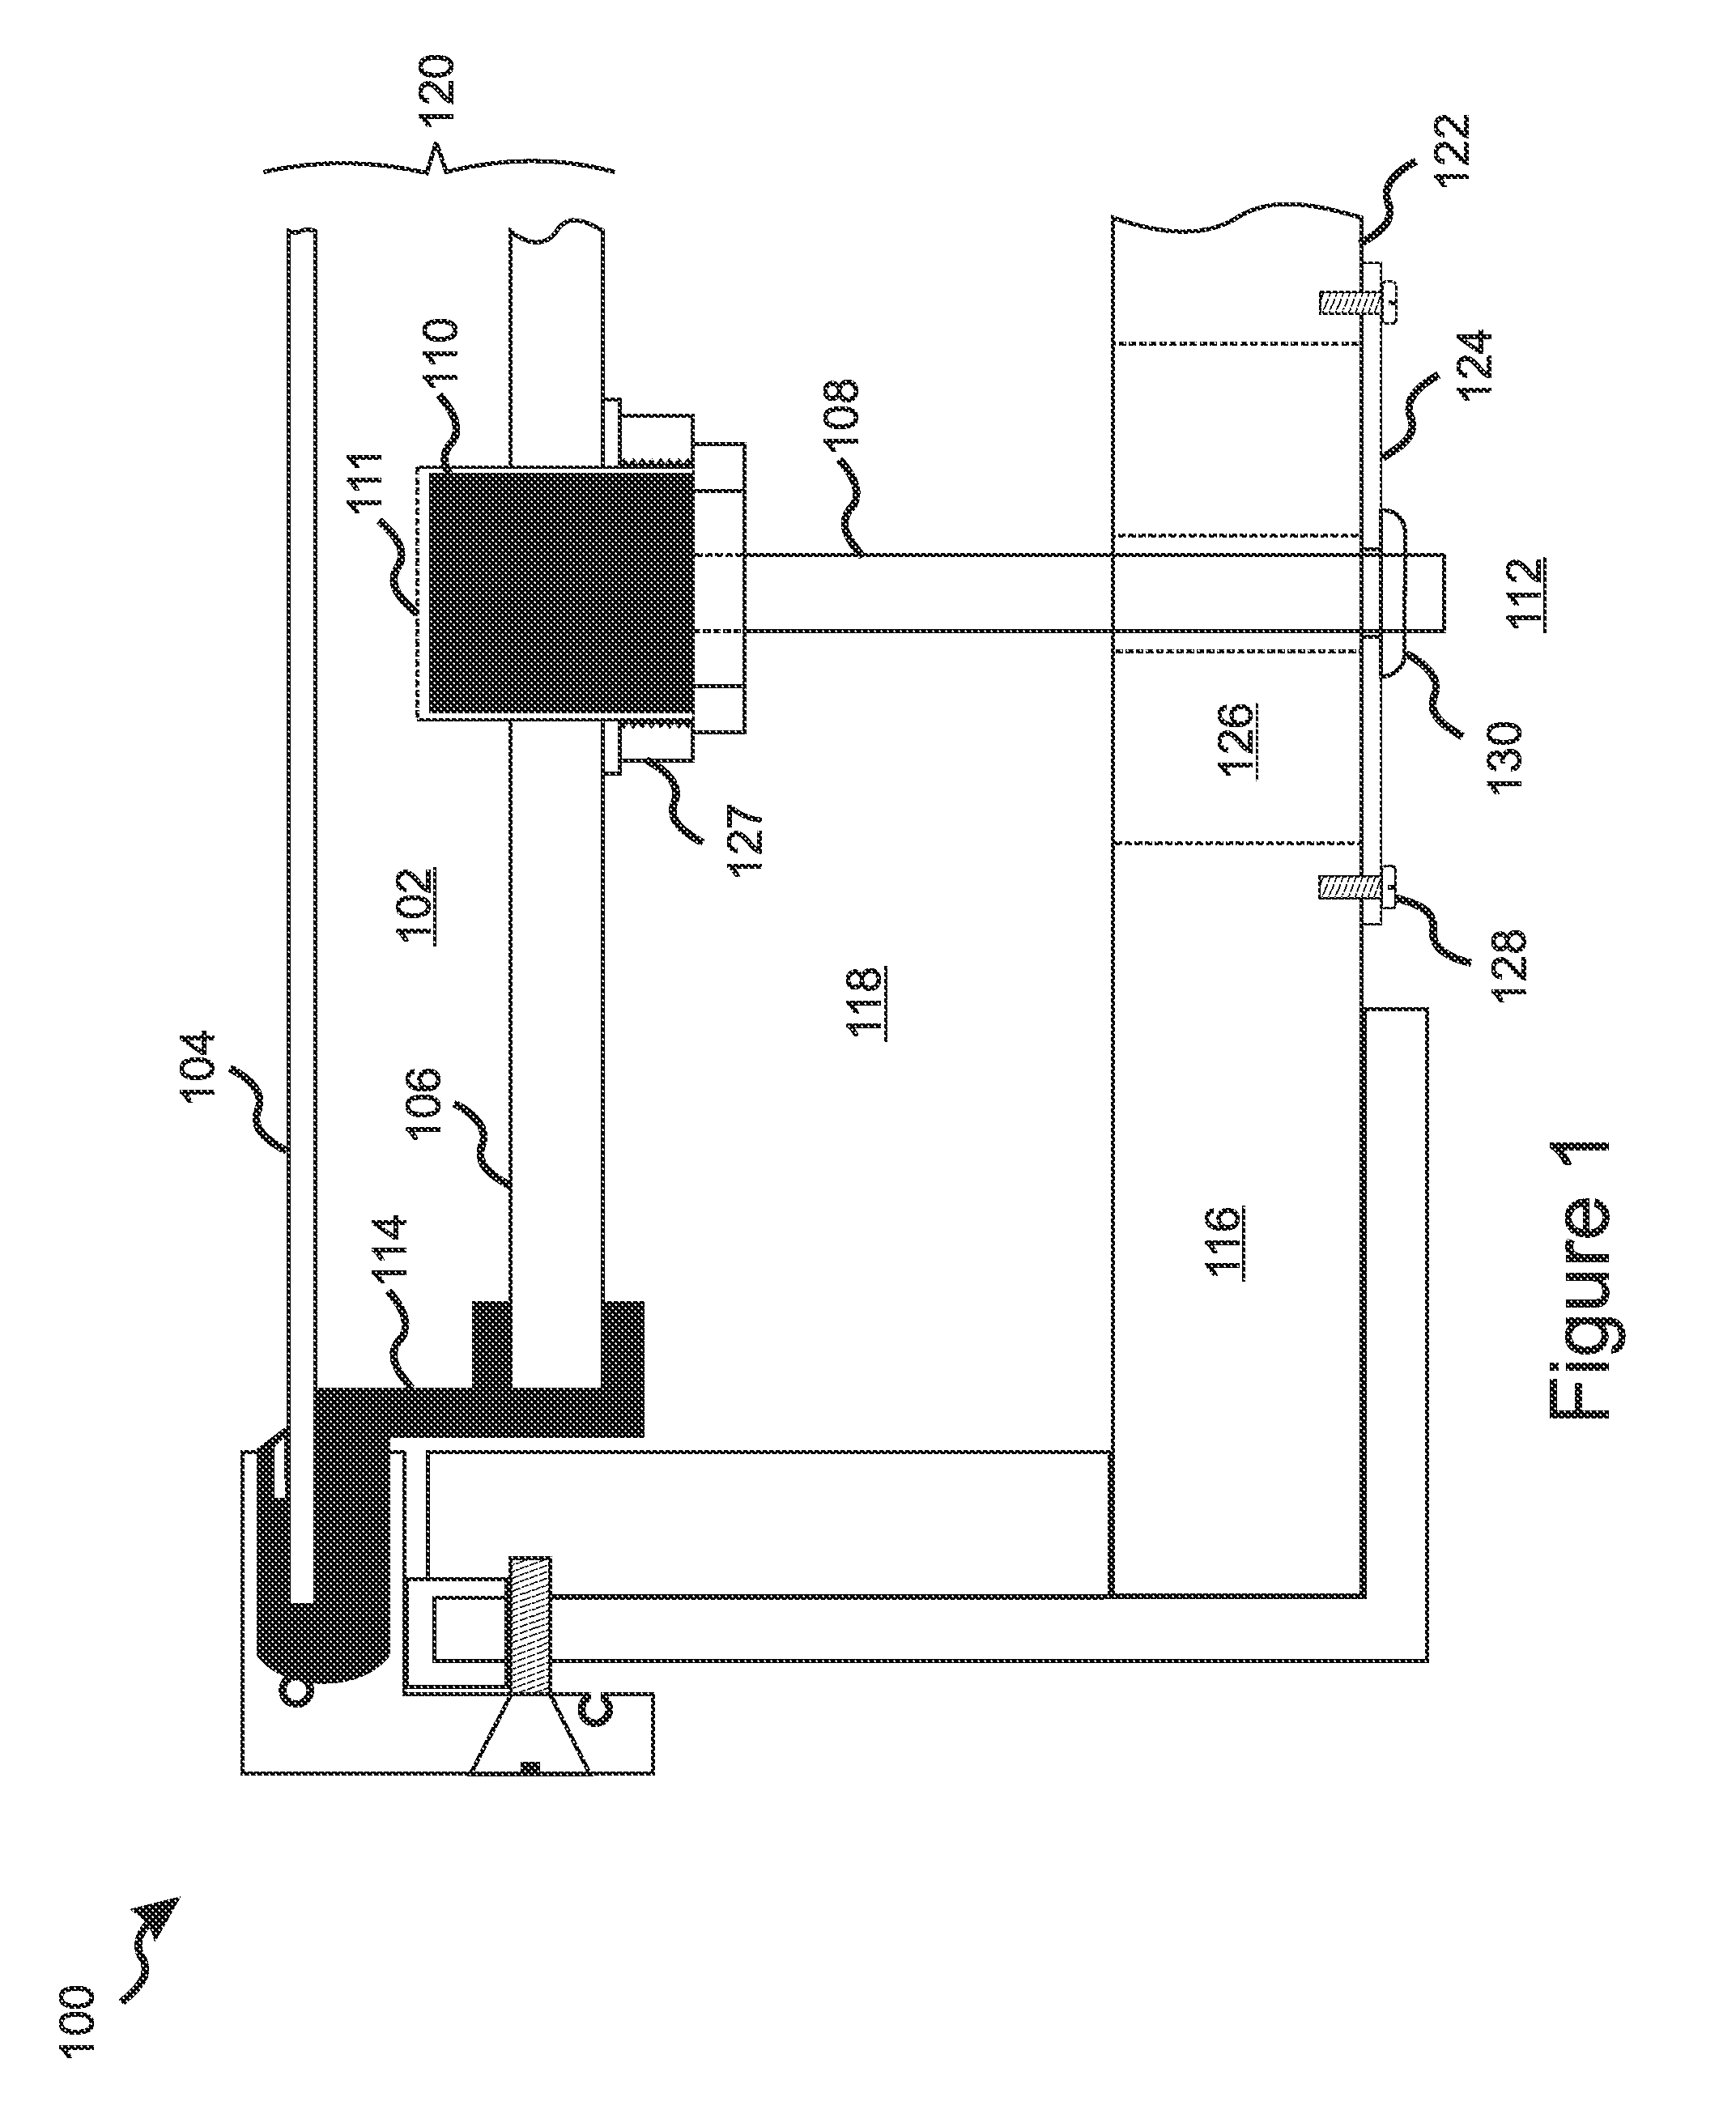 Apparatus for inhibiting pressure fluctuations and moisture contamination within solar collectors and multi-glazed windows